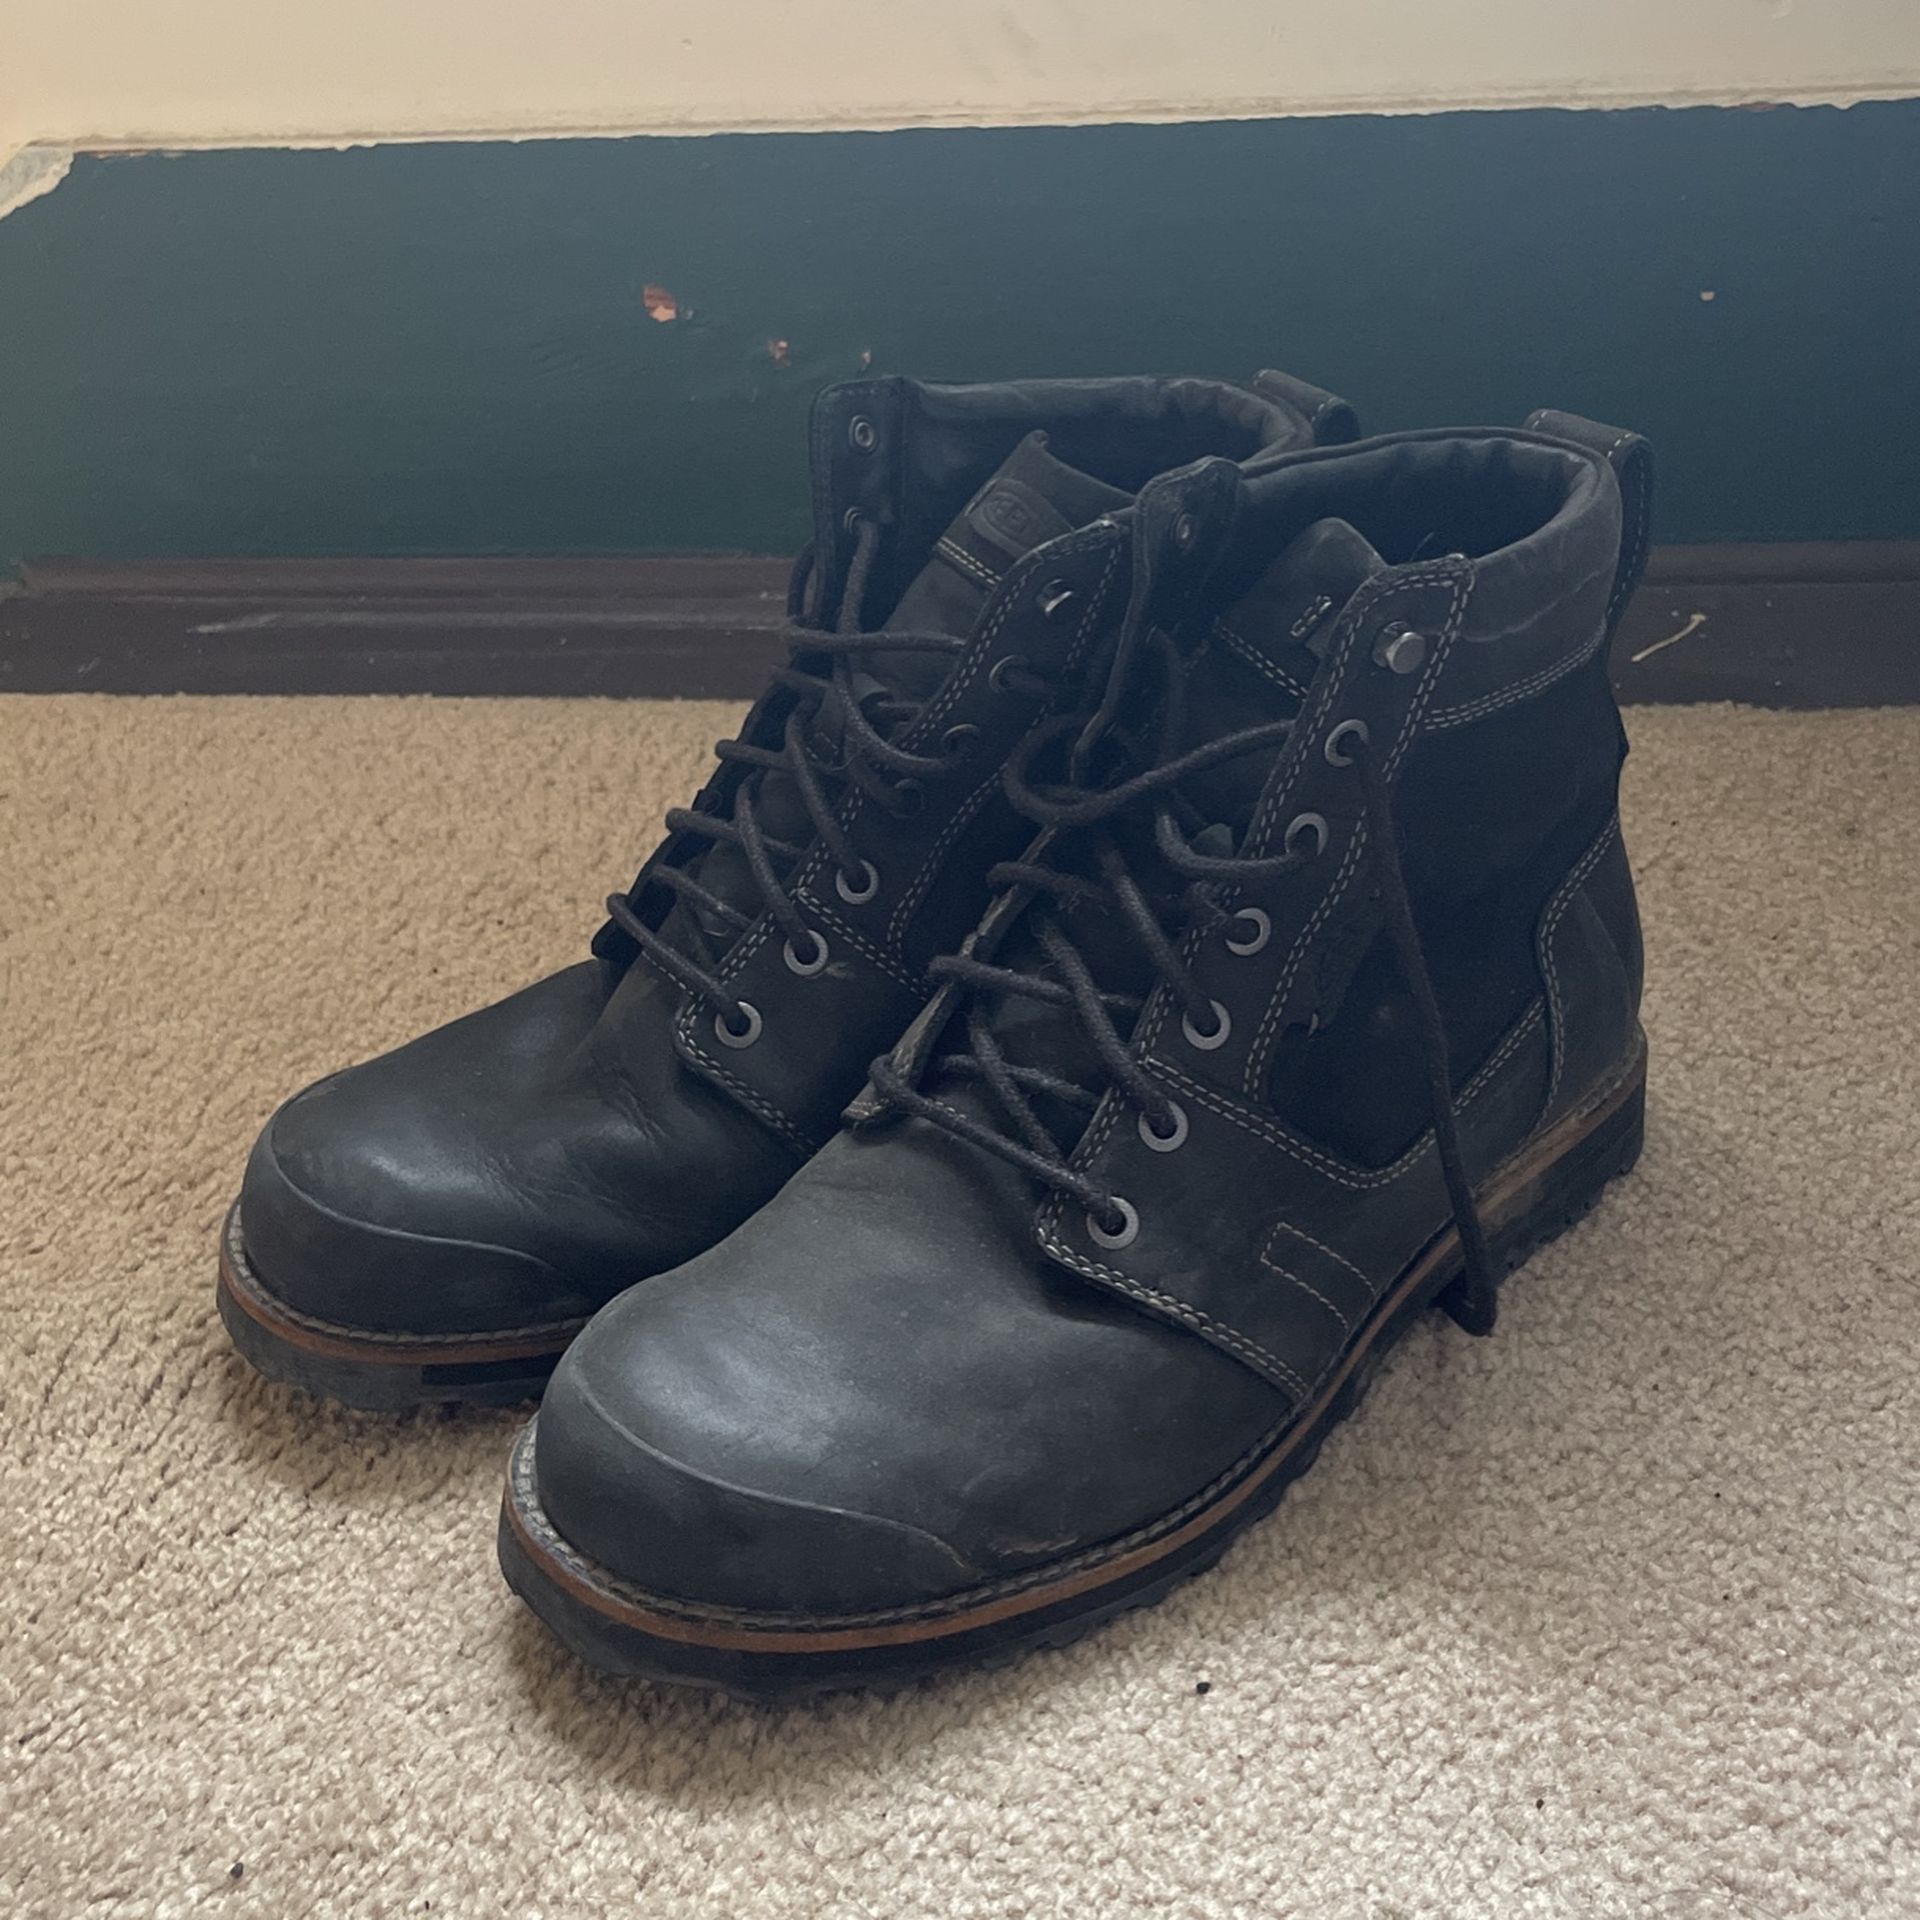 Mens Boots Size 10.5